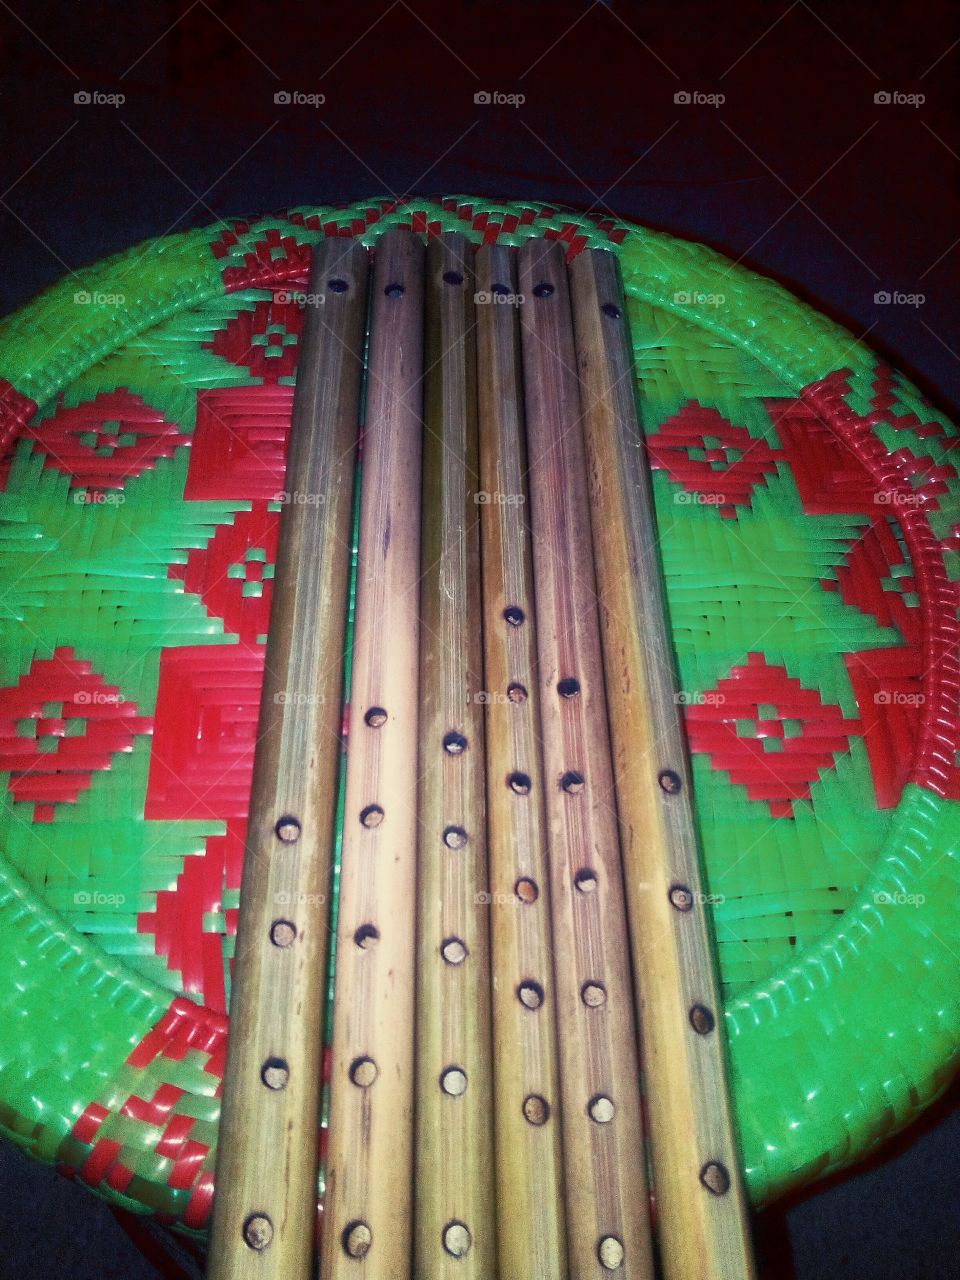 Flute made by bamboo